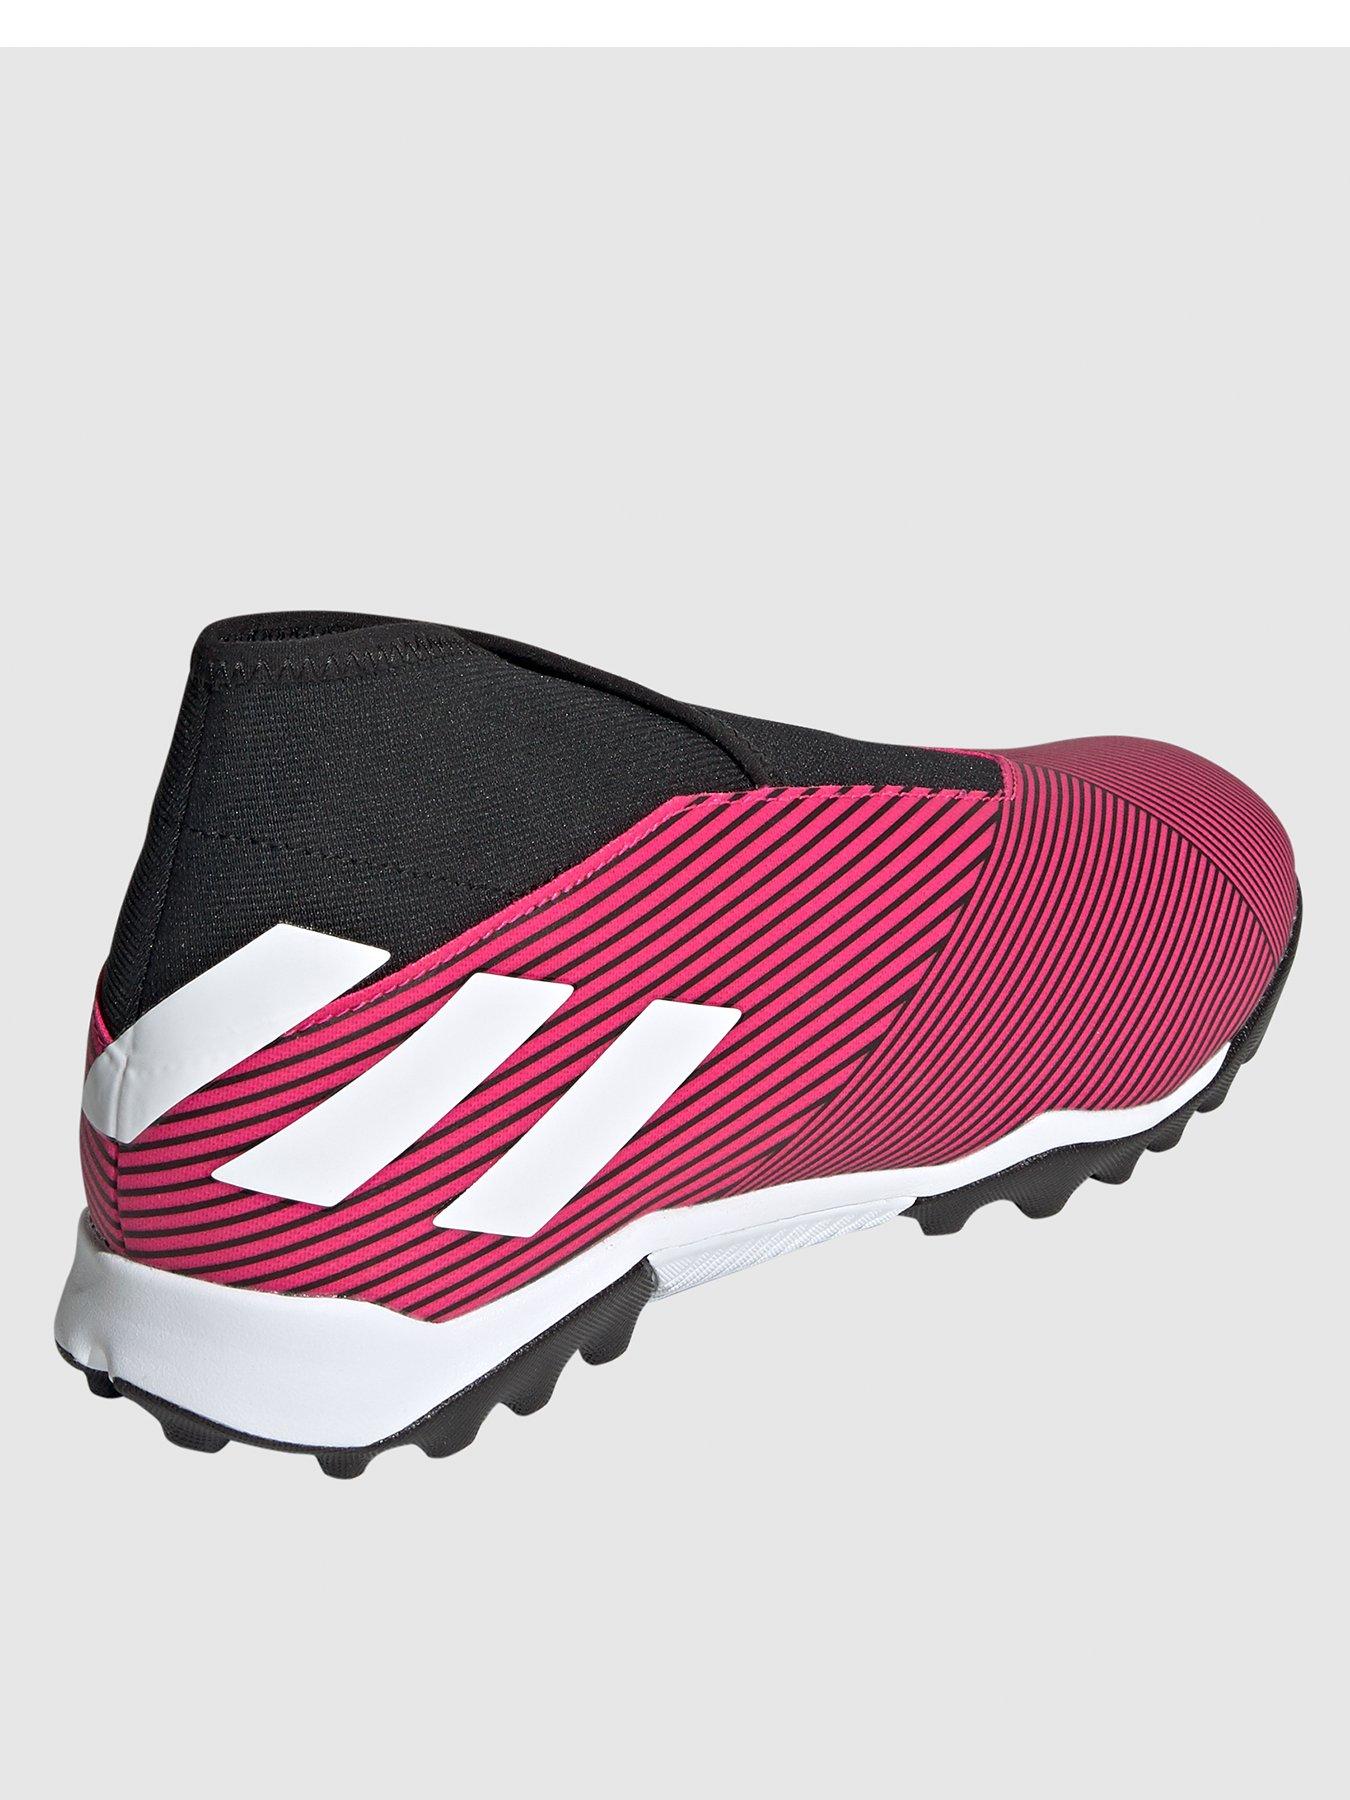 laceless football boots astro turf